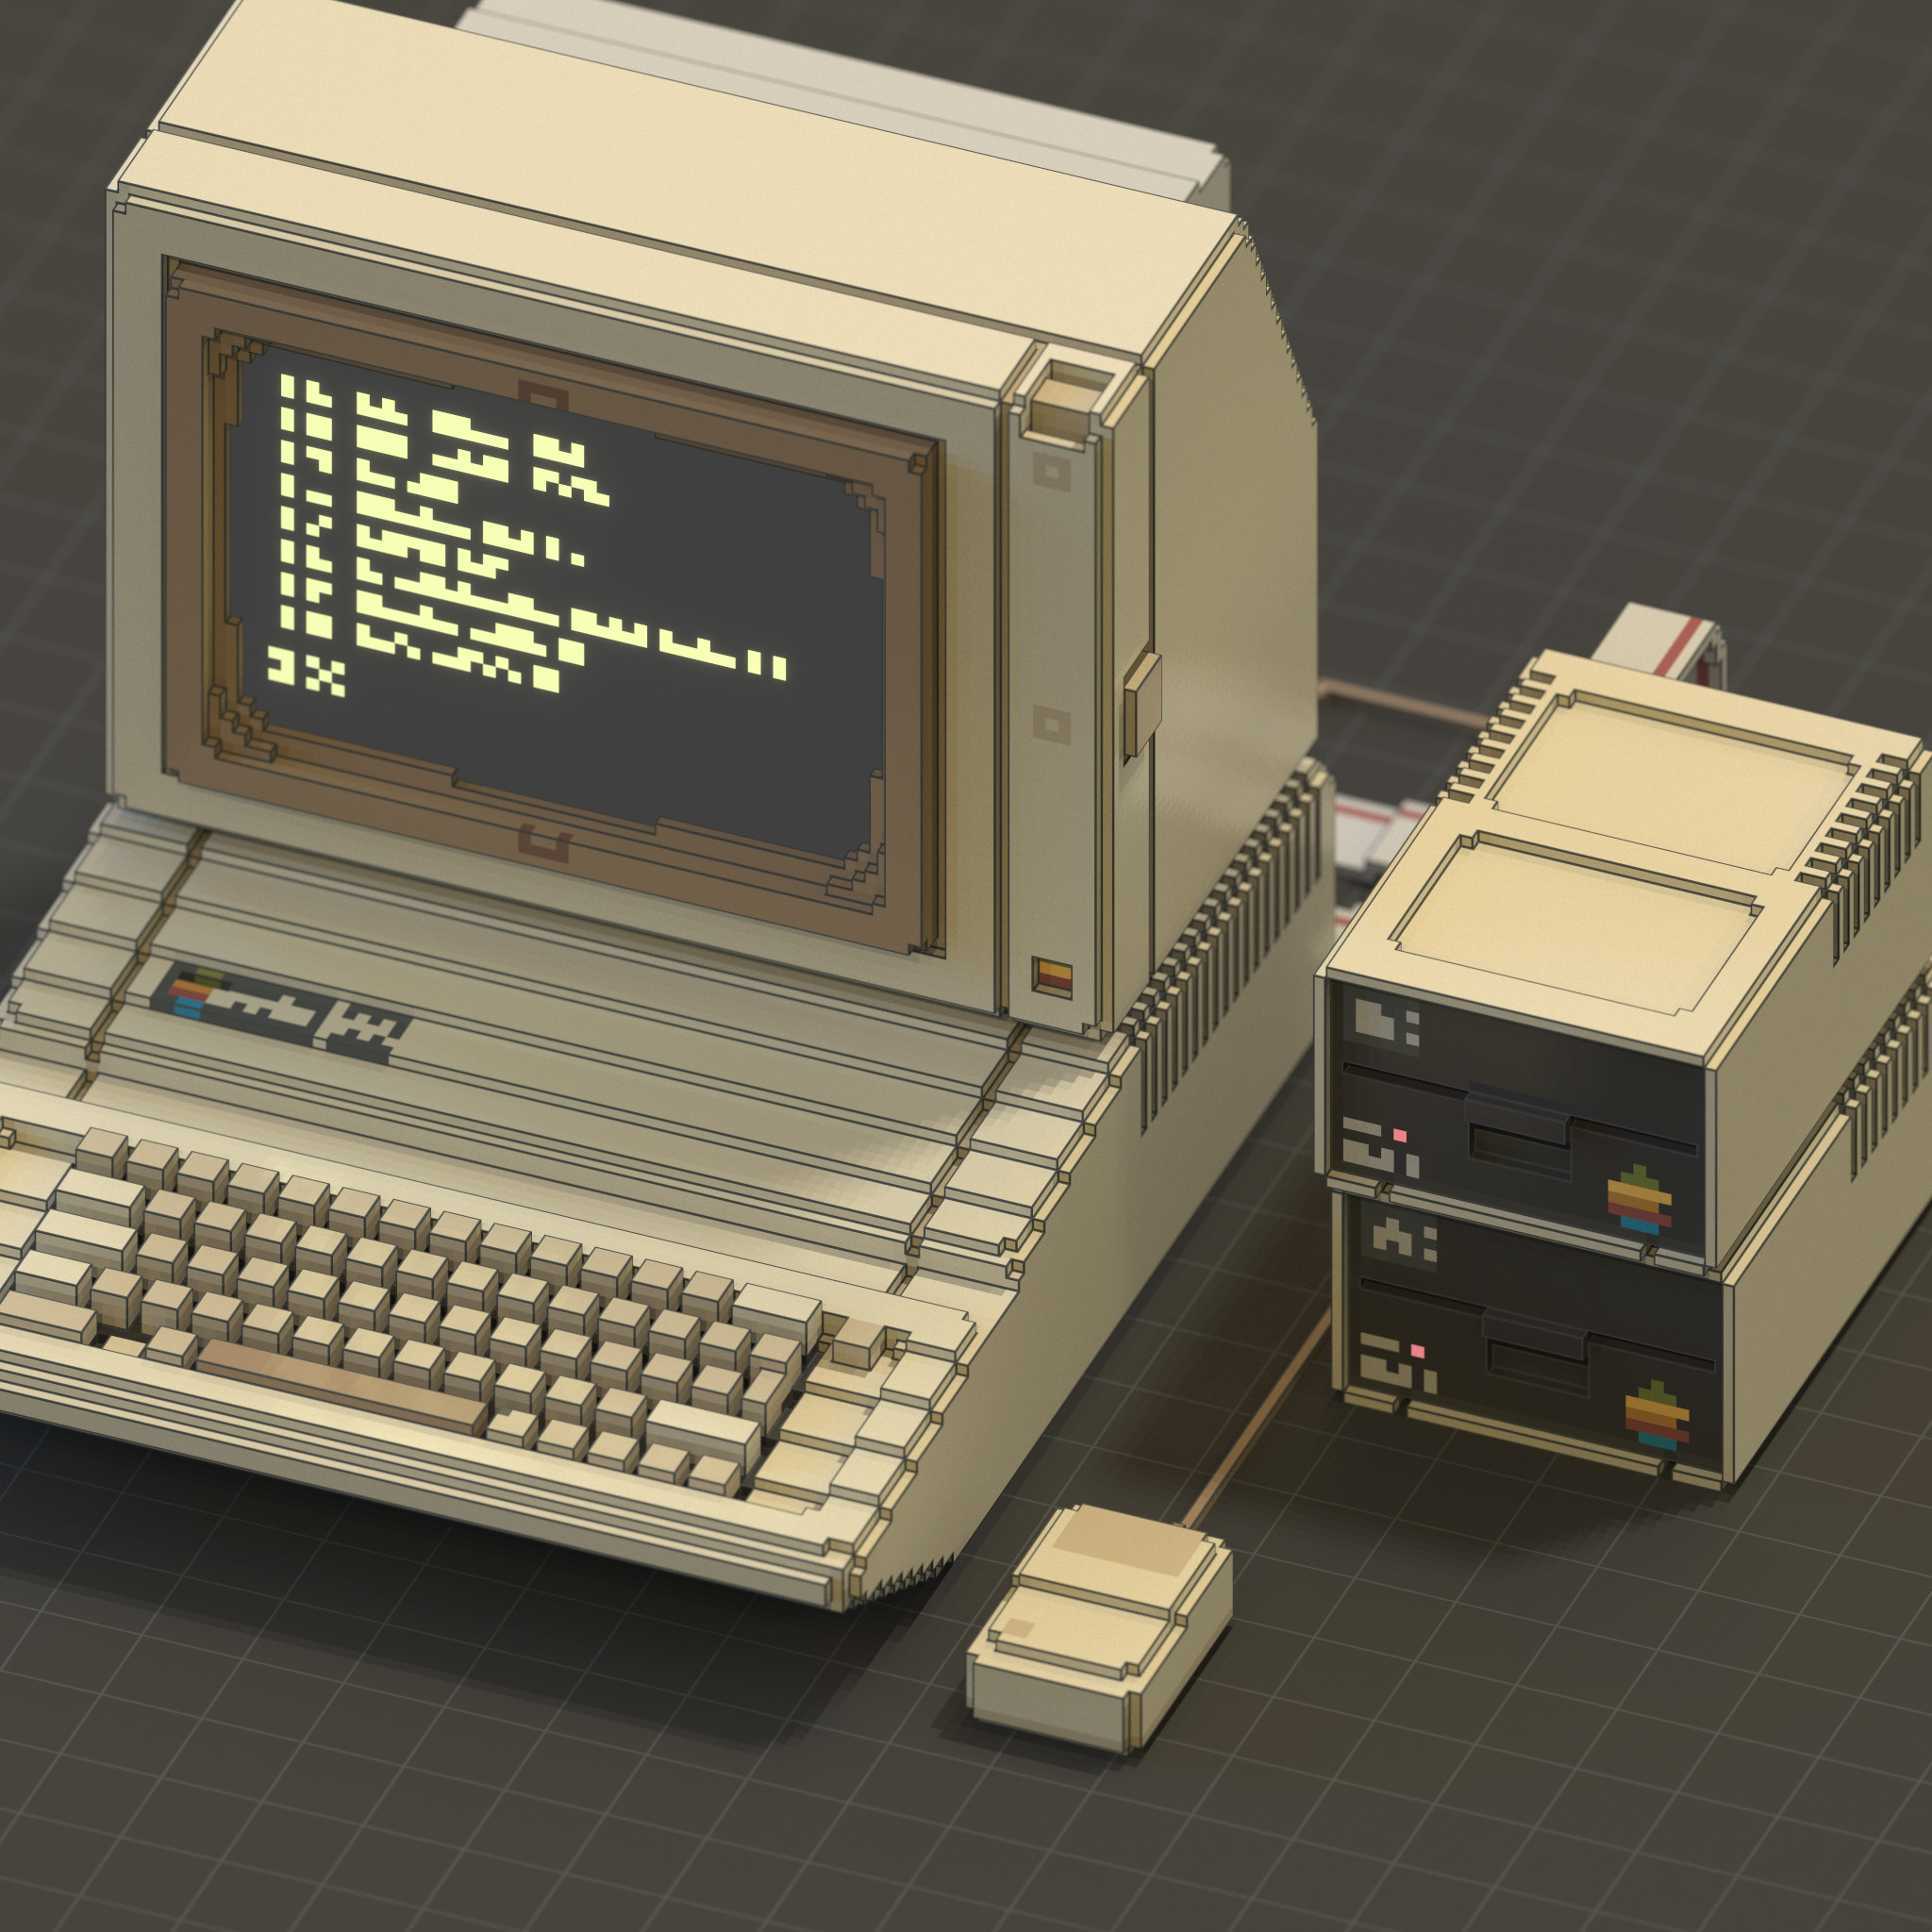 Overhead rendering of a voxel Apple IIe  focusing on the details making up the external disk drives, mouse, keyboard and CRT display.